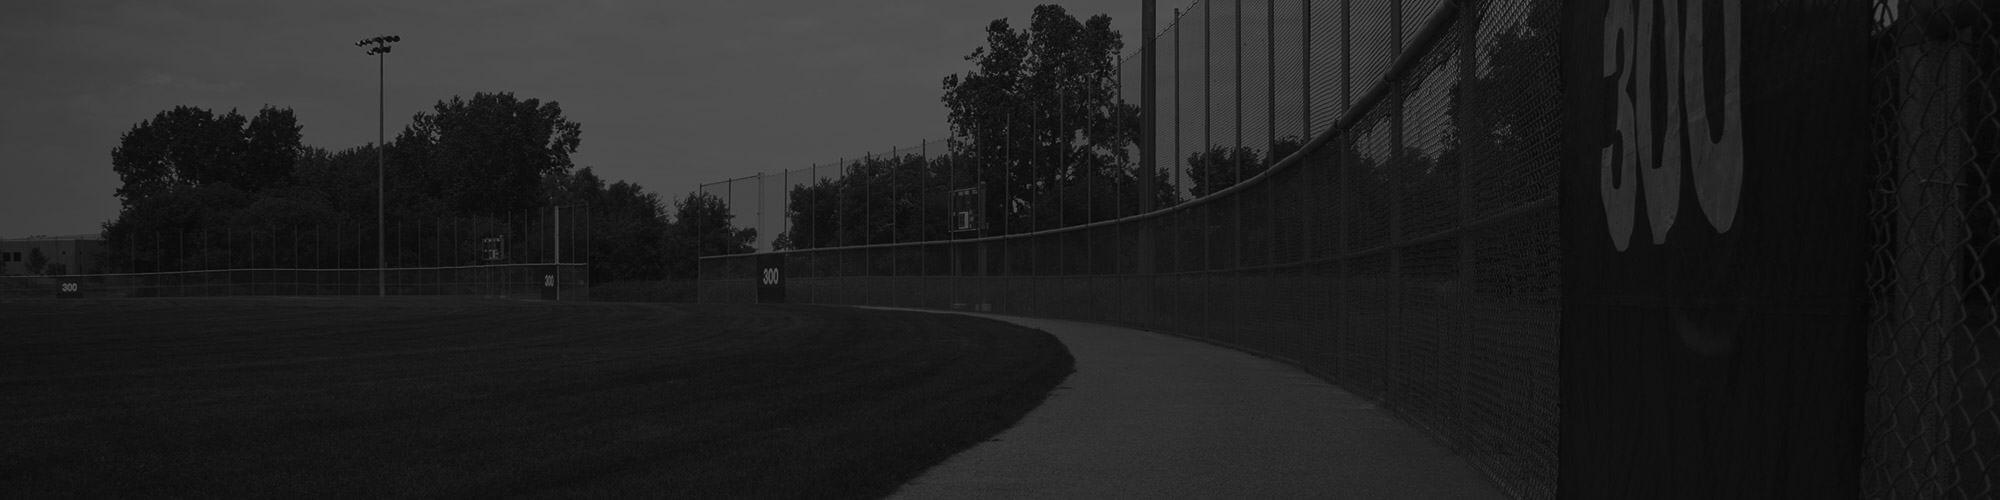 A darkened landscape photo of a baseball field is shown, focused on the warning track.